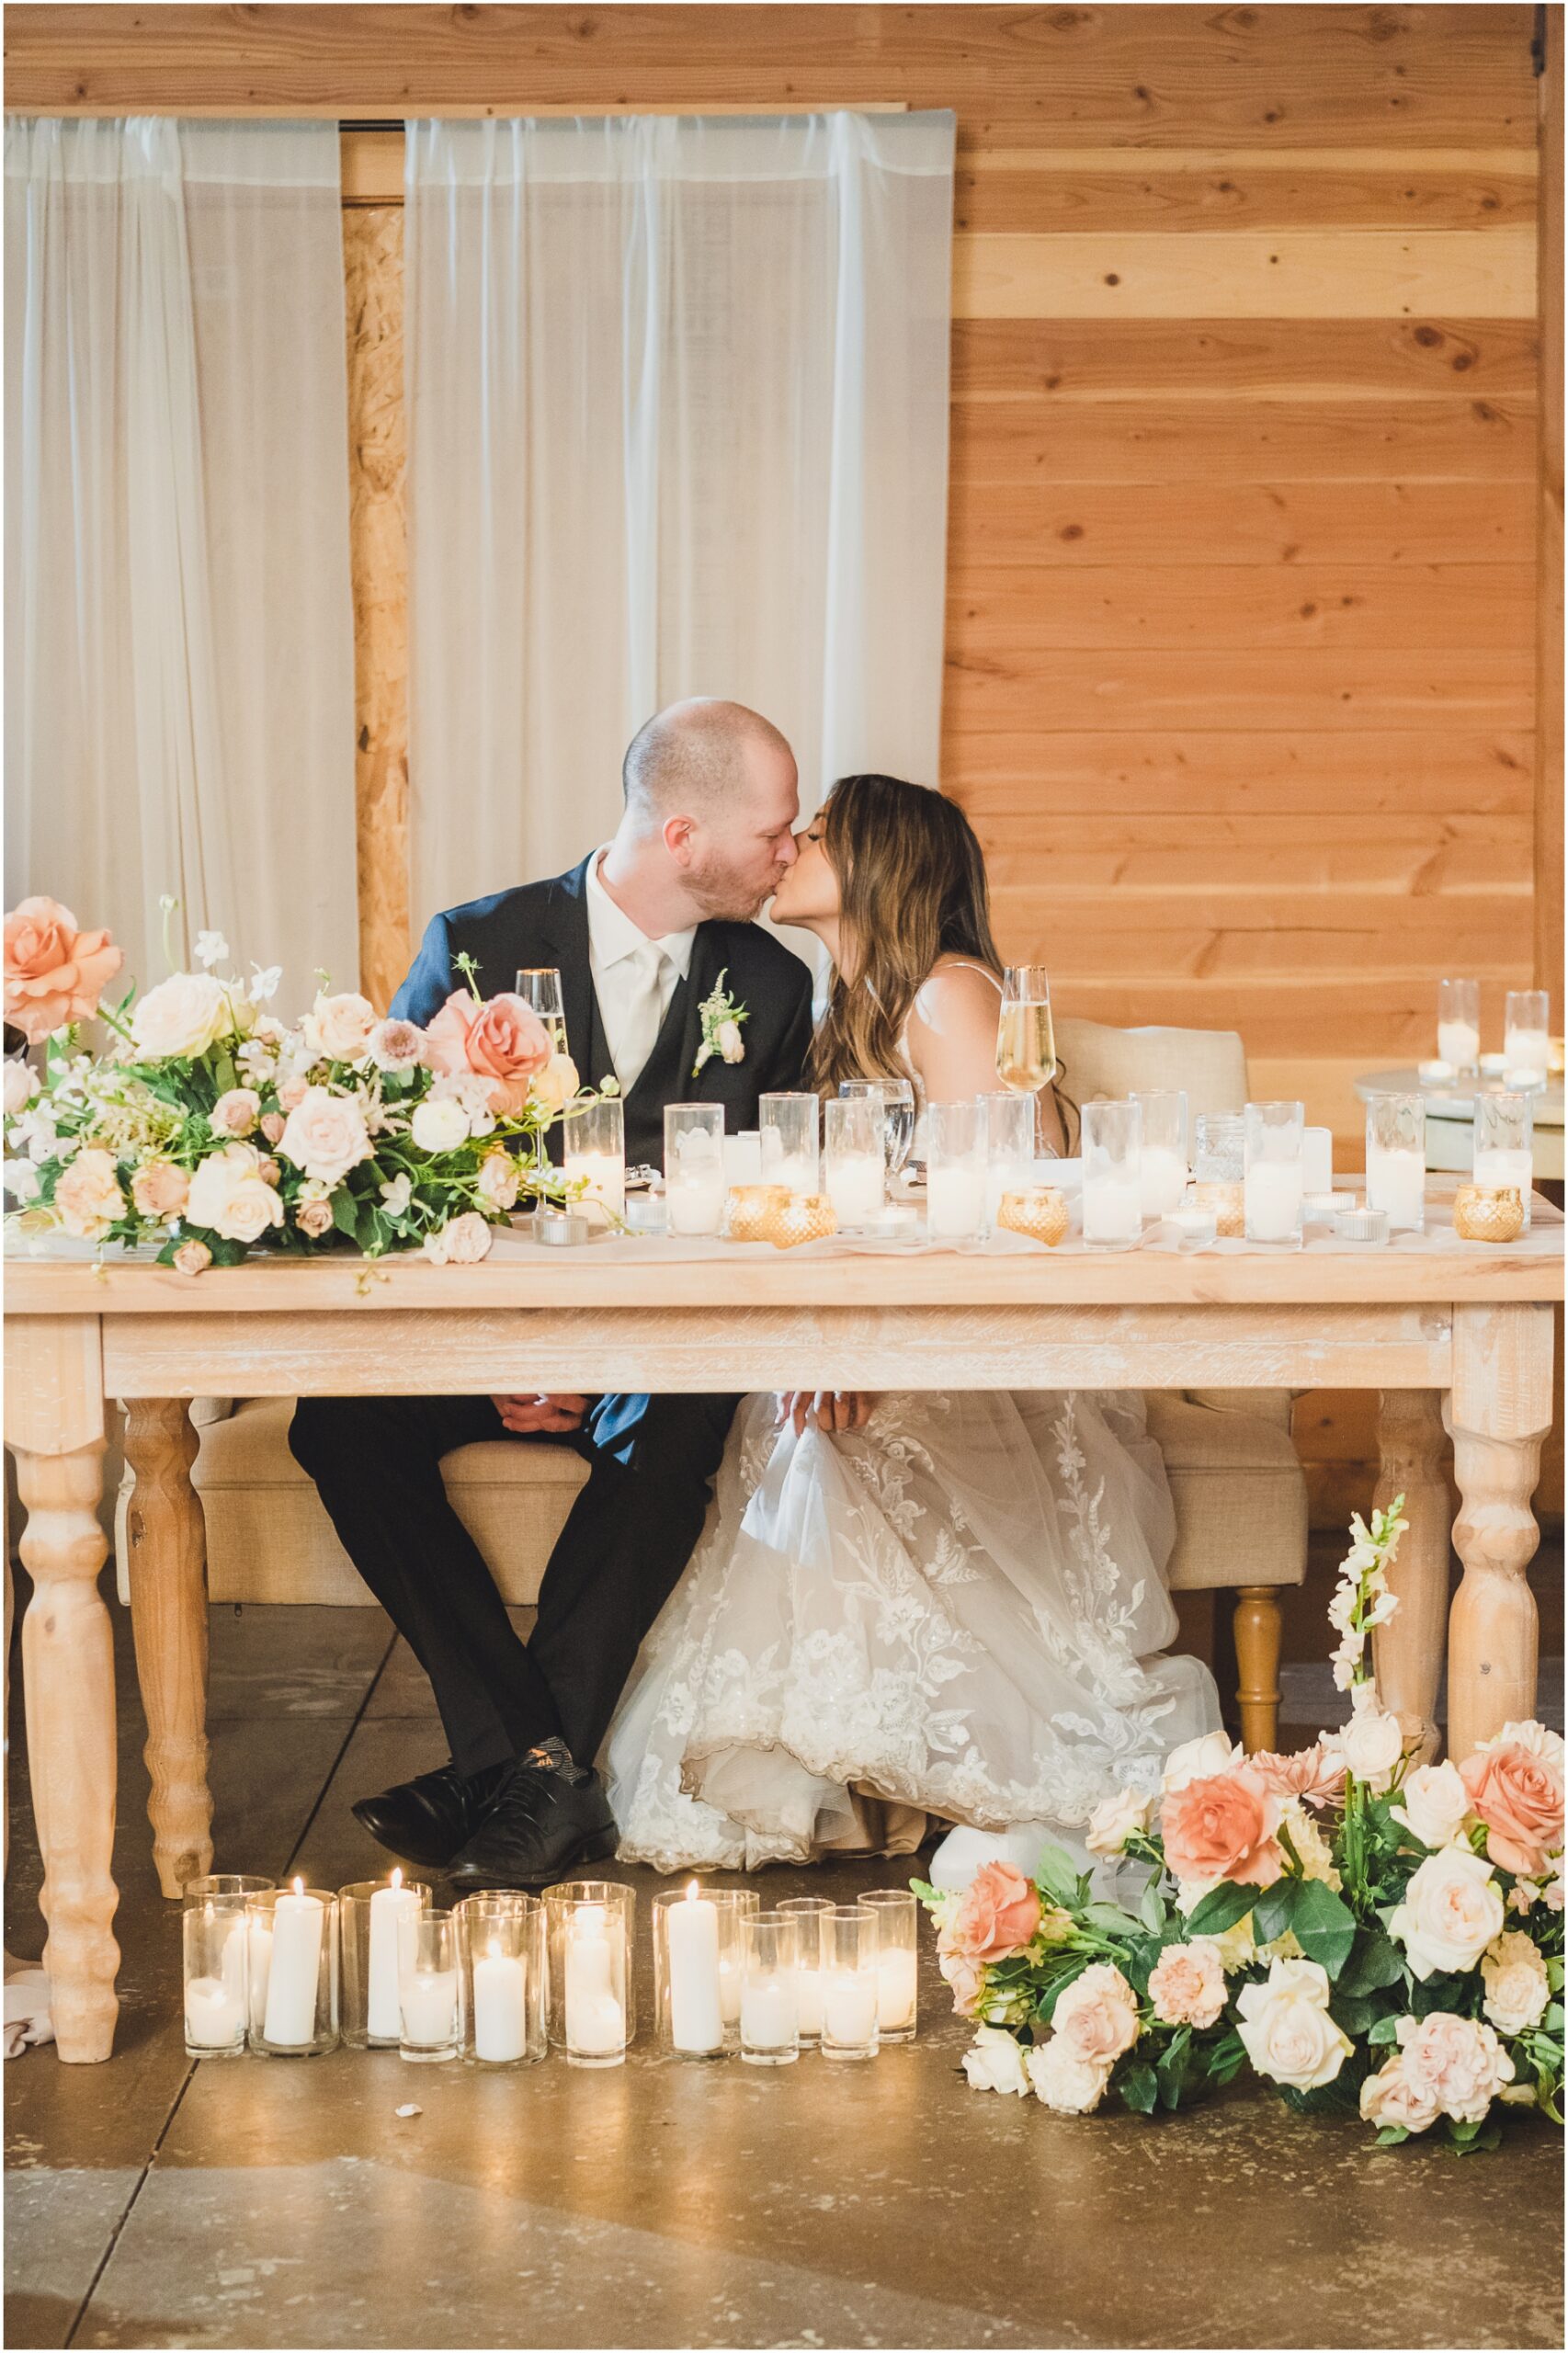 A wedding photo featuring a bride and groom kissing at their sweetheart table at Serendipity garden weddings